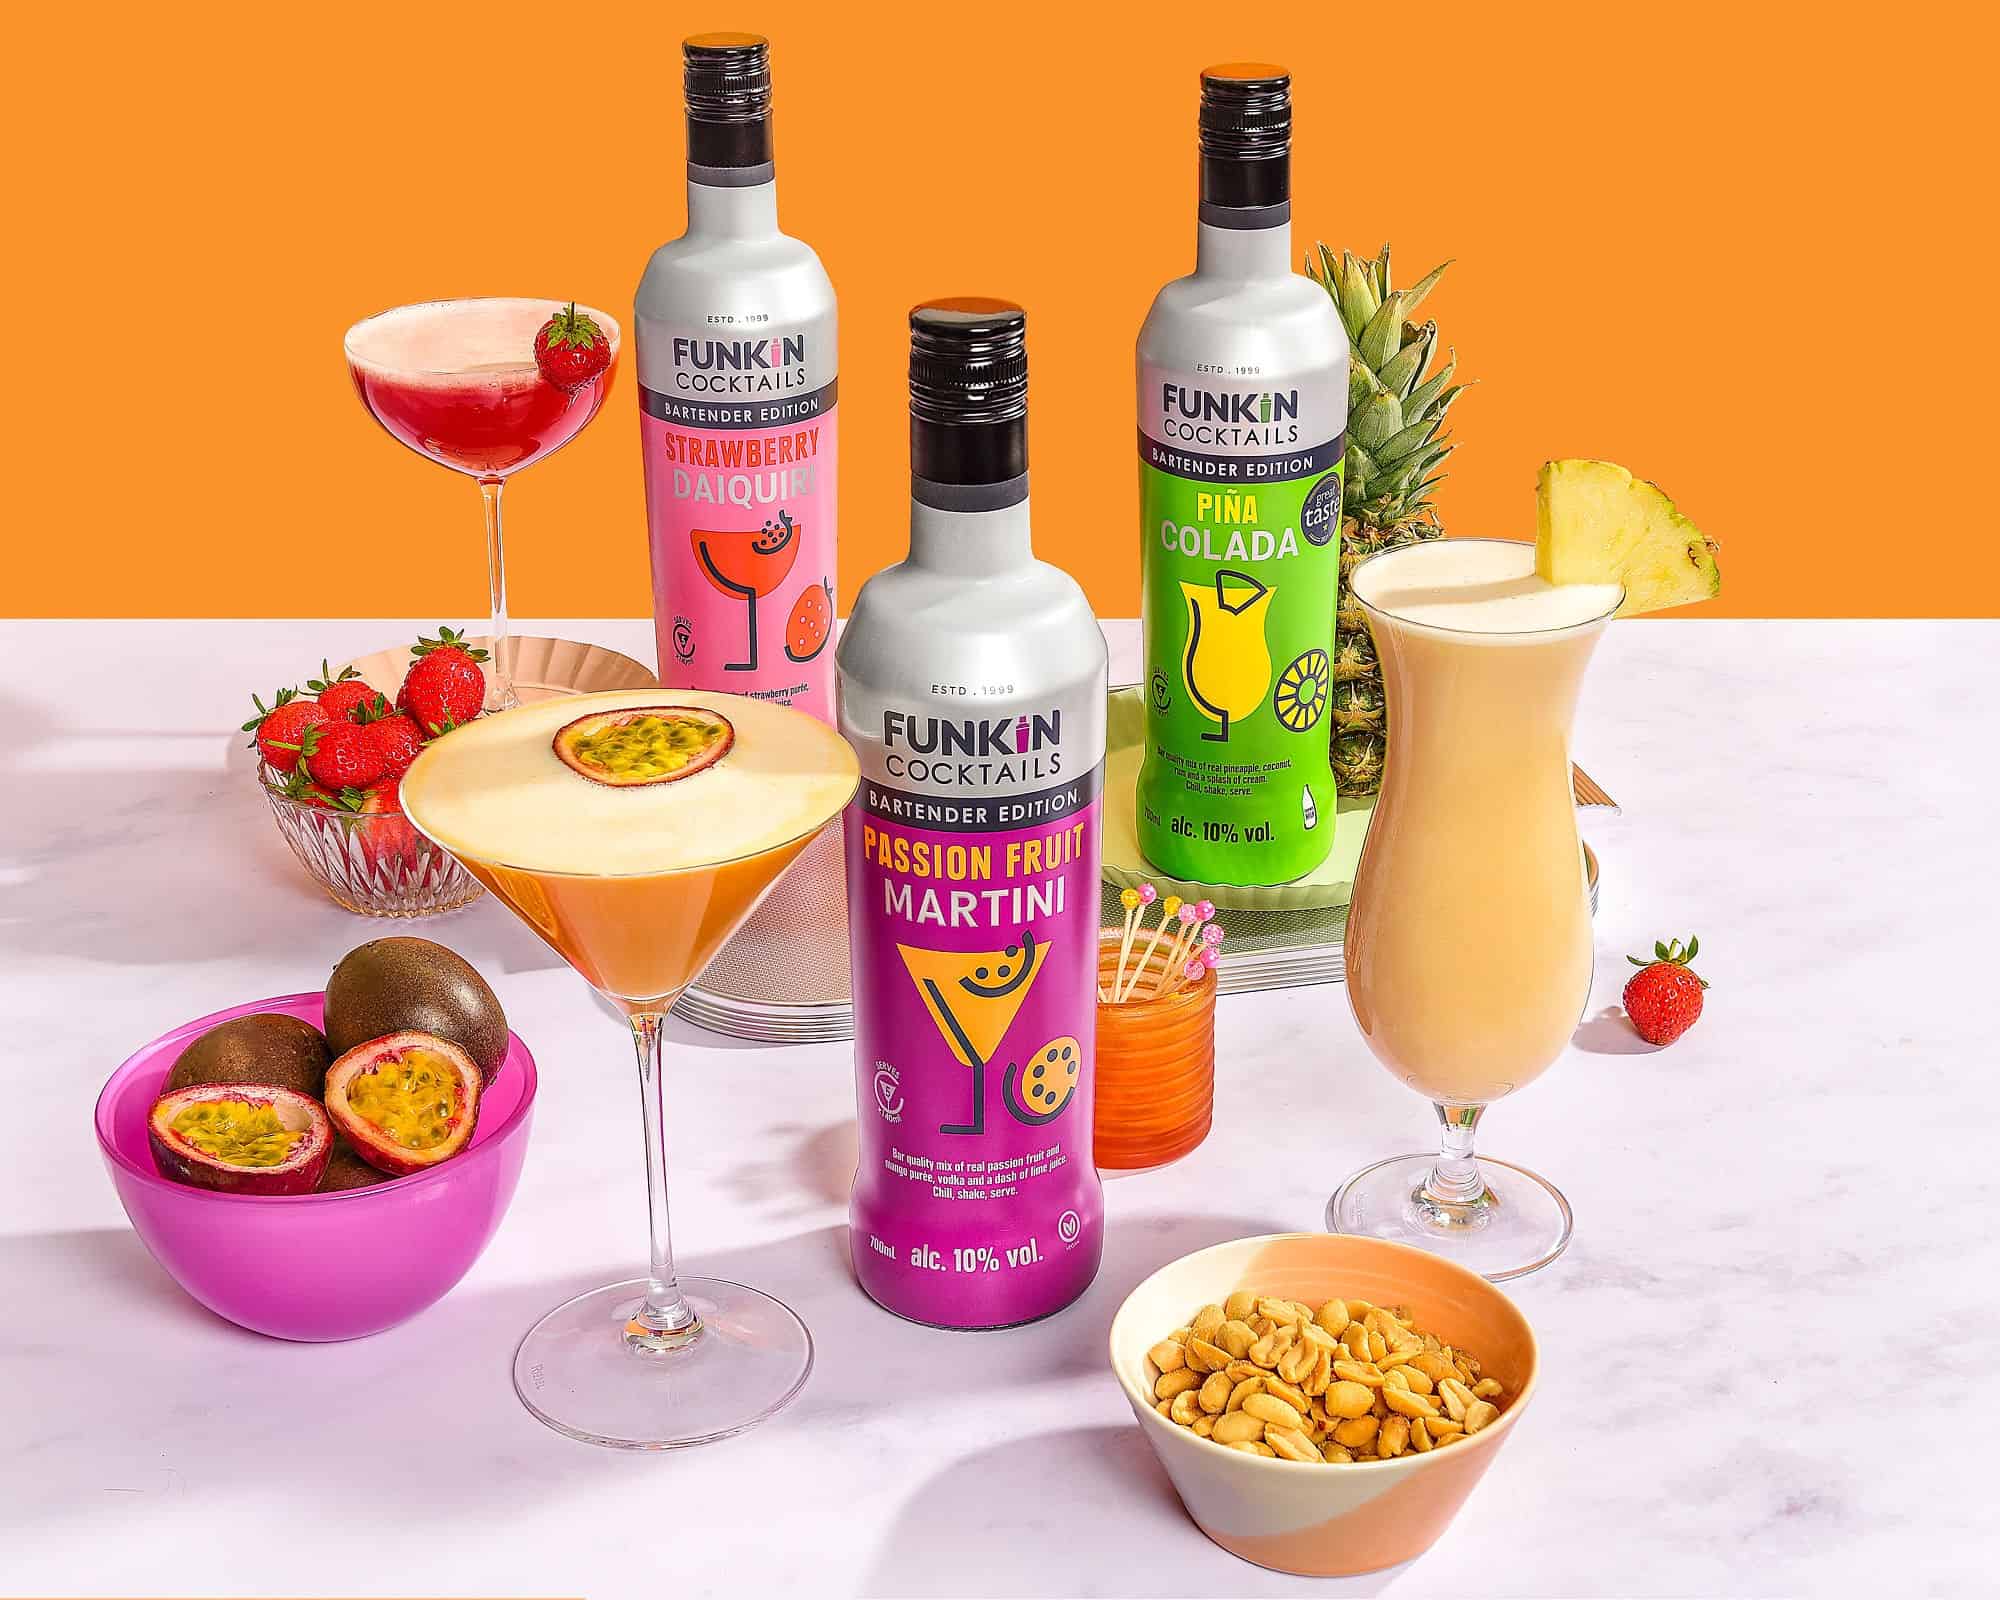 Image shows FUNKIN Cocktail pre-mixed syrups and ready-to-drink mixes.